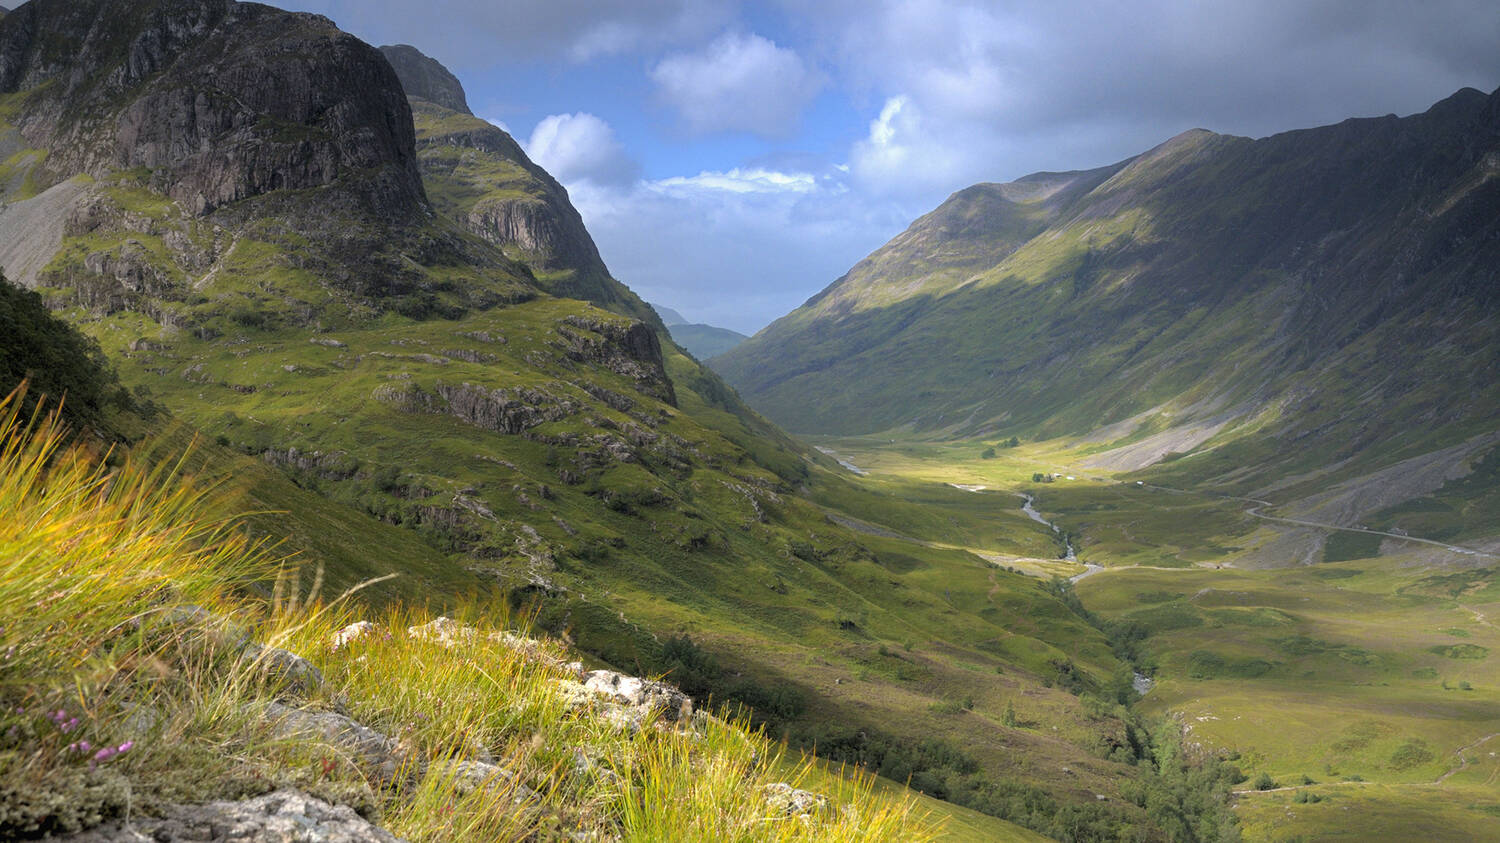 A view looking down the glen of Glencoe on a sunny day, with the steep mountains on either side casting shadows on the opposite side.